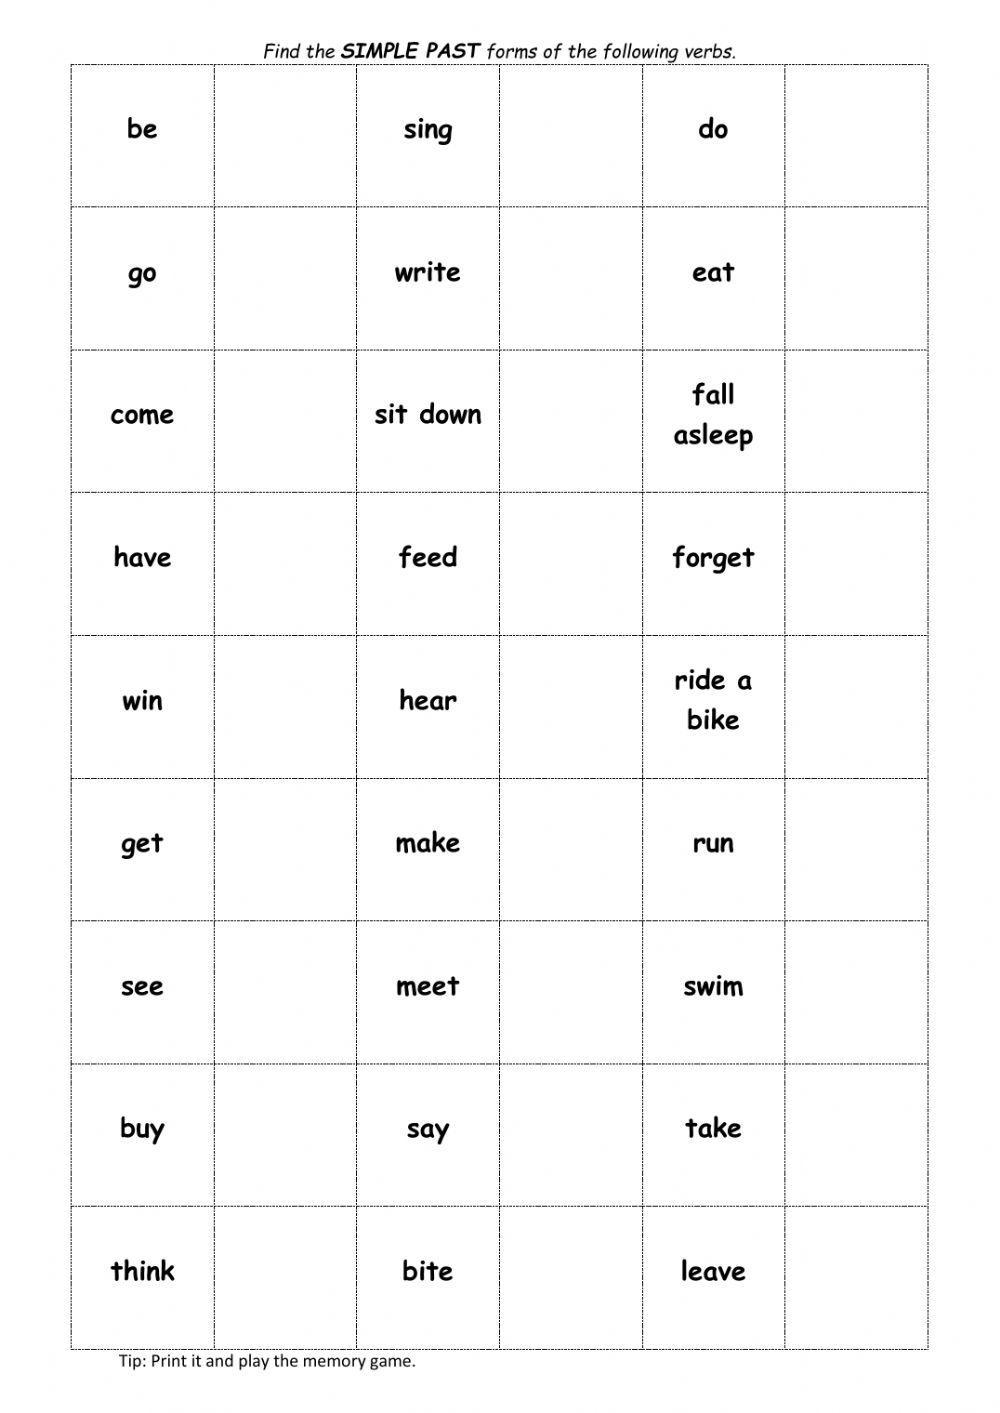 Simple past verb forms